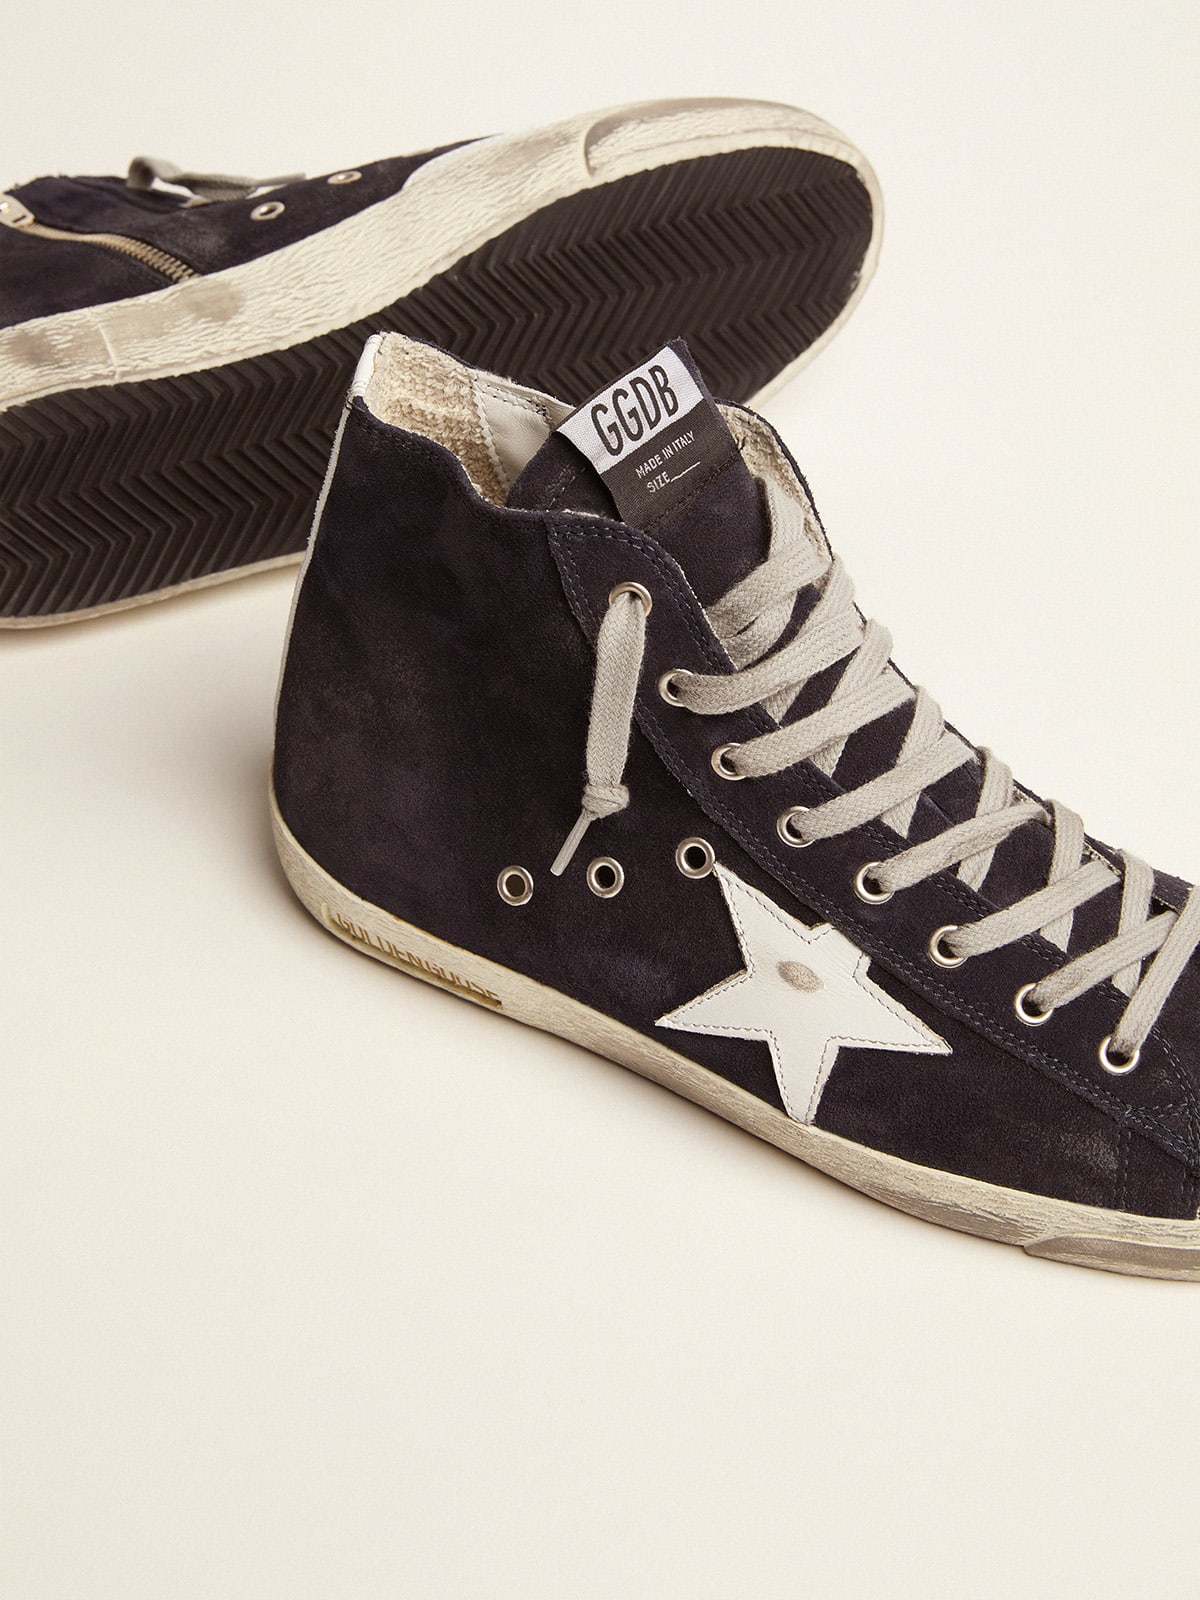 Golden Goose - Men's Francy in leather with leather star and heel tab in 